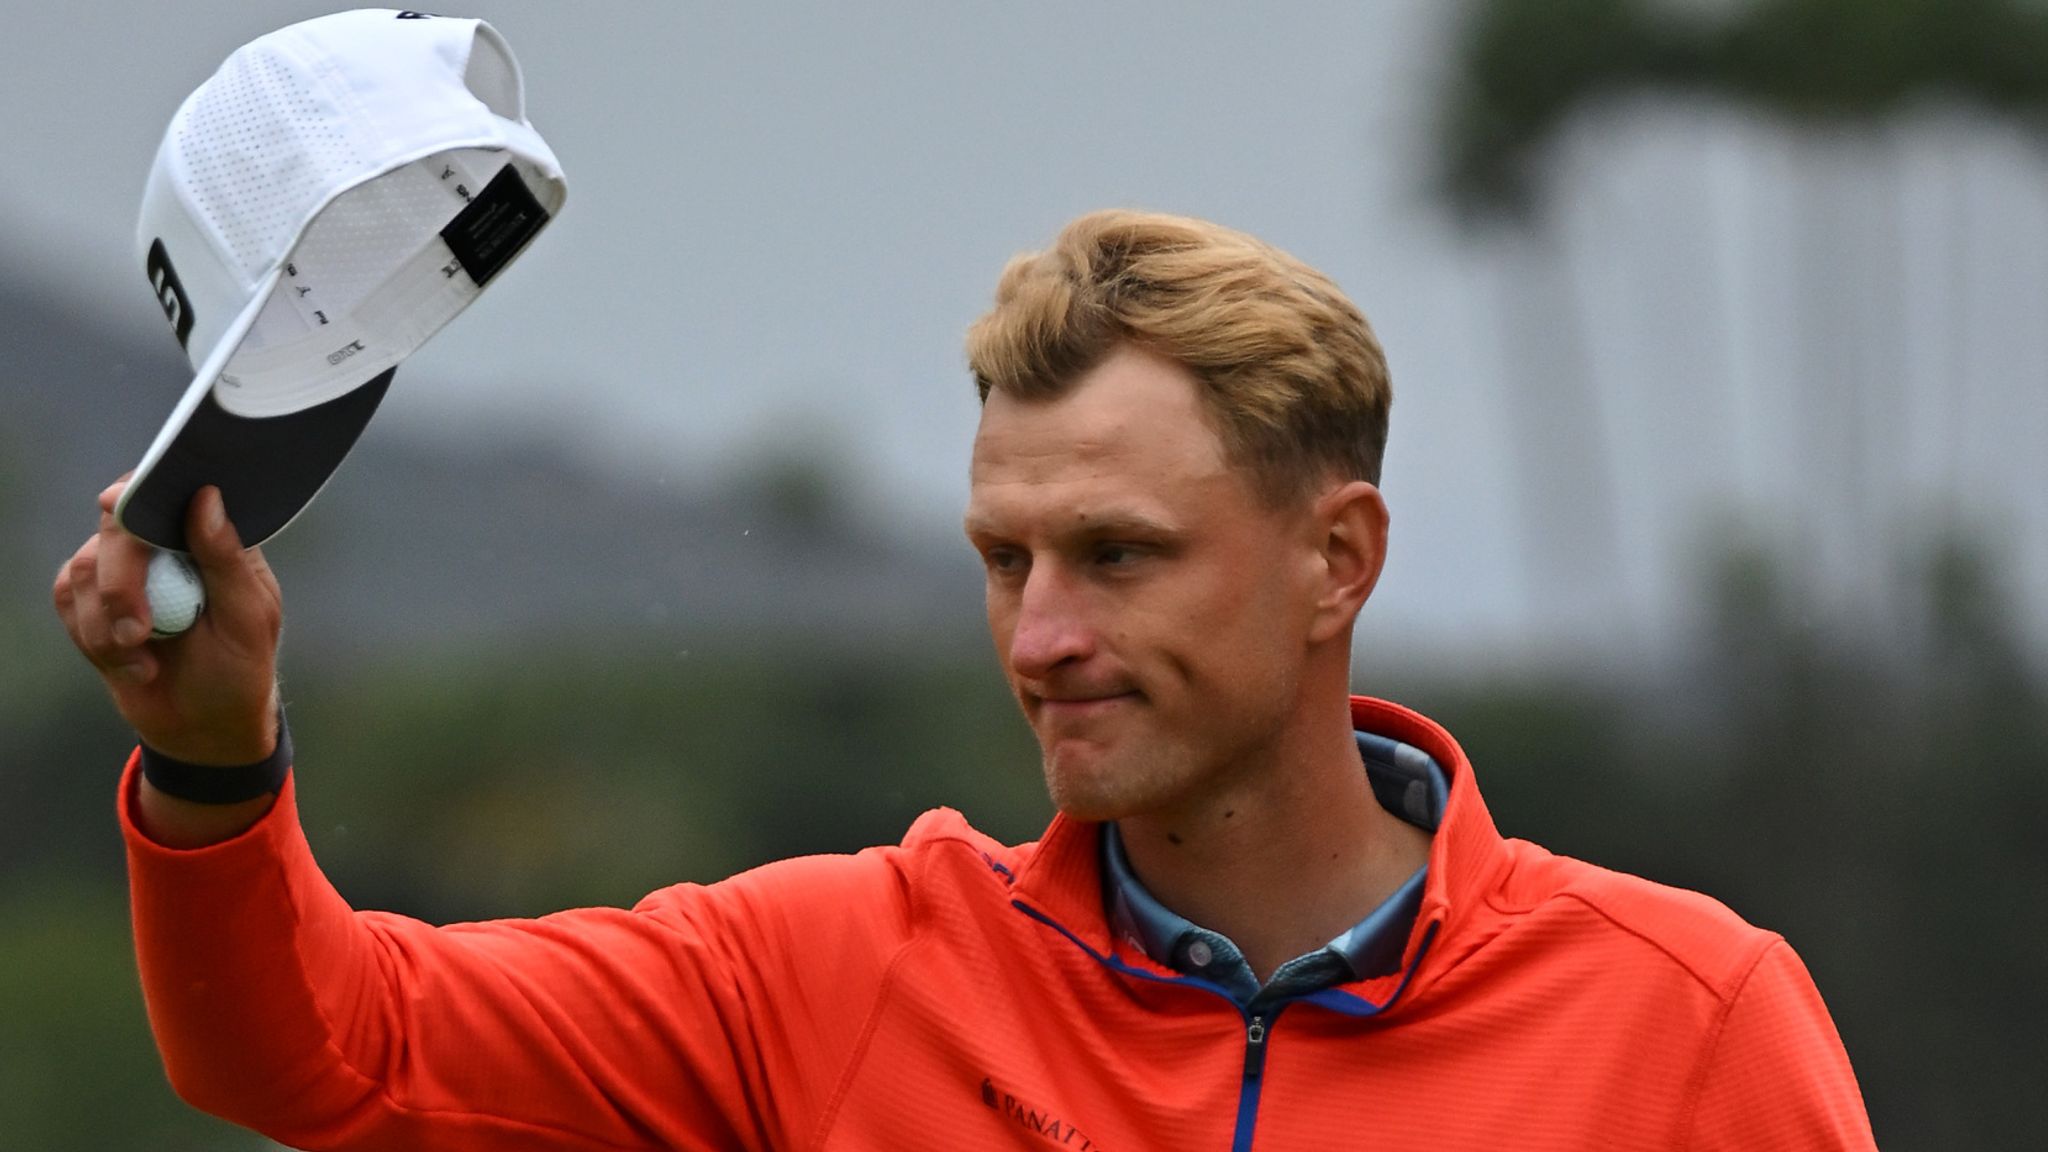 Adrian Meronk triumphs in DS Automobiles Italian Open with impressive final  round performance